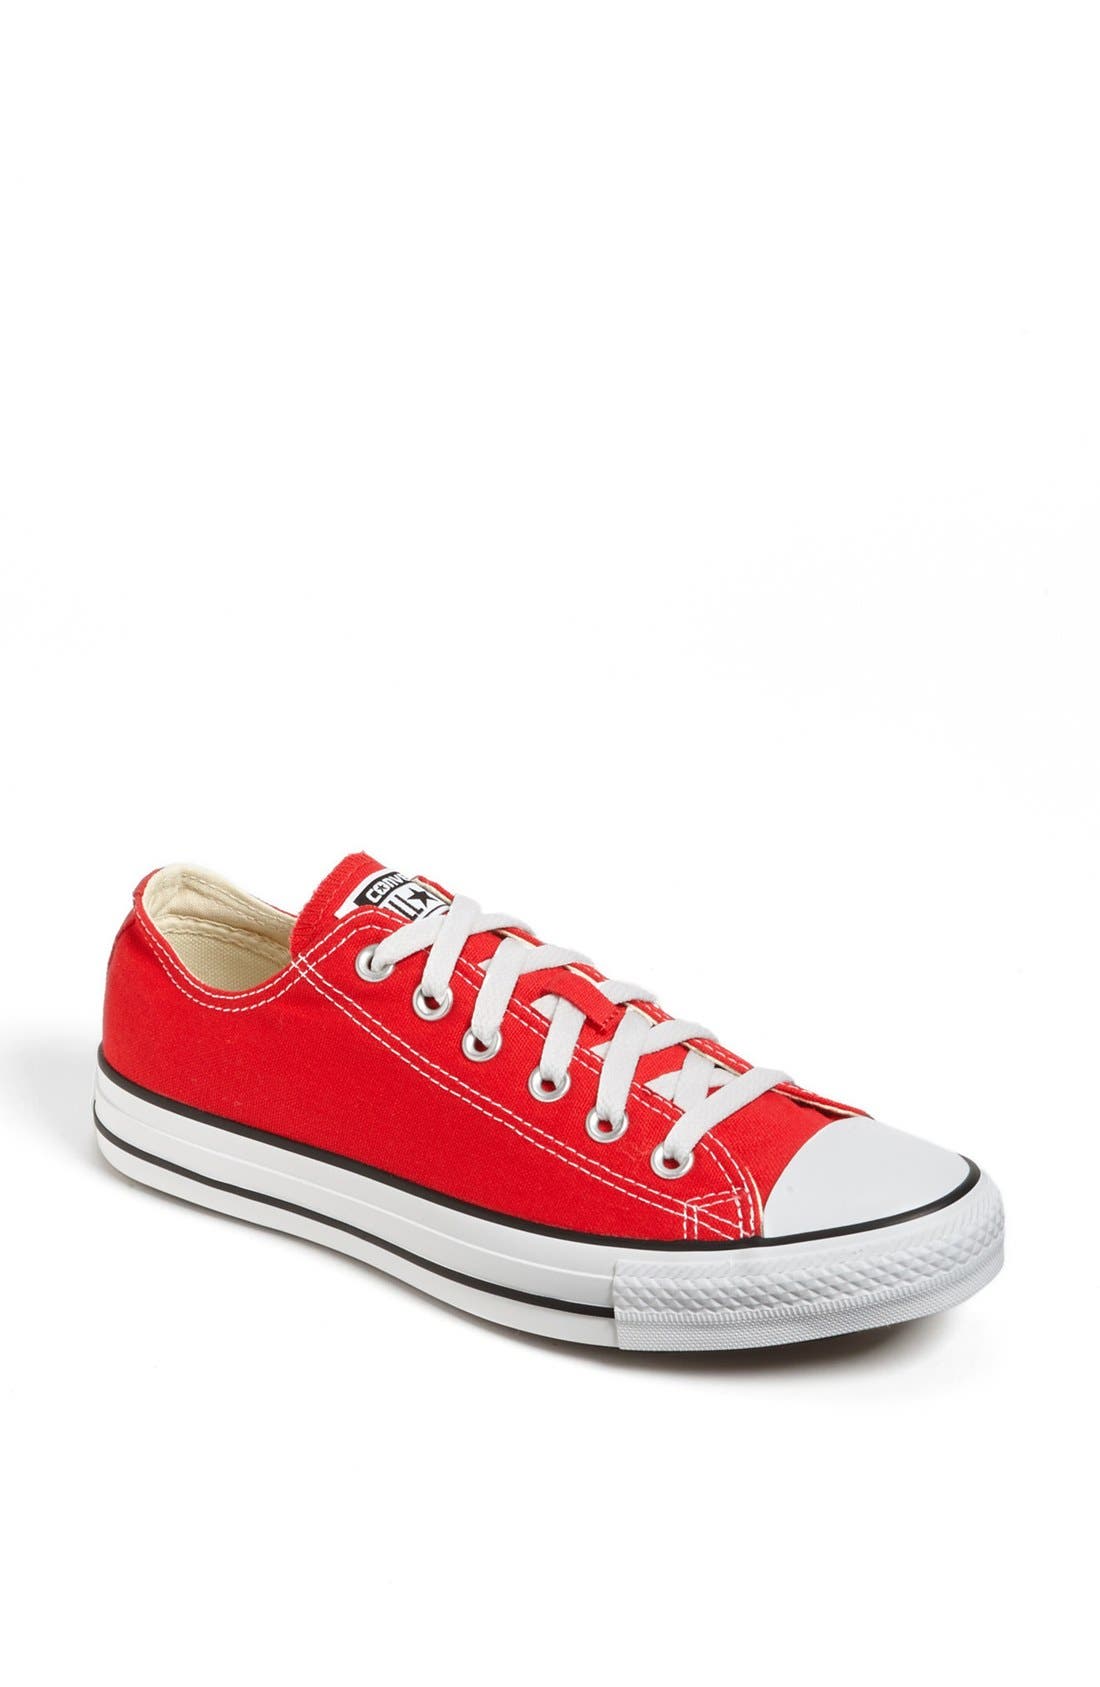 high top red converse womens